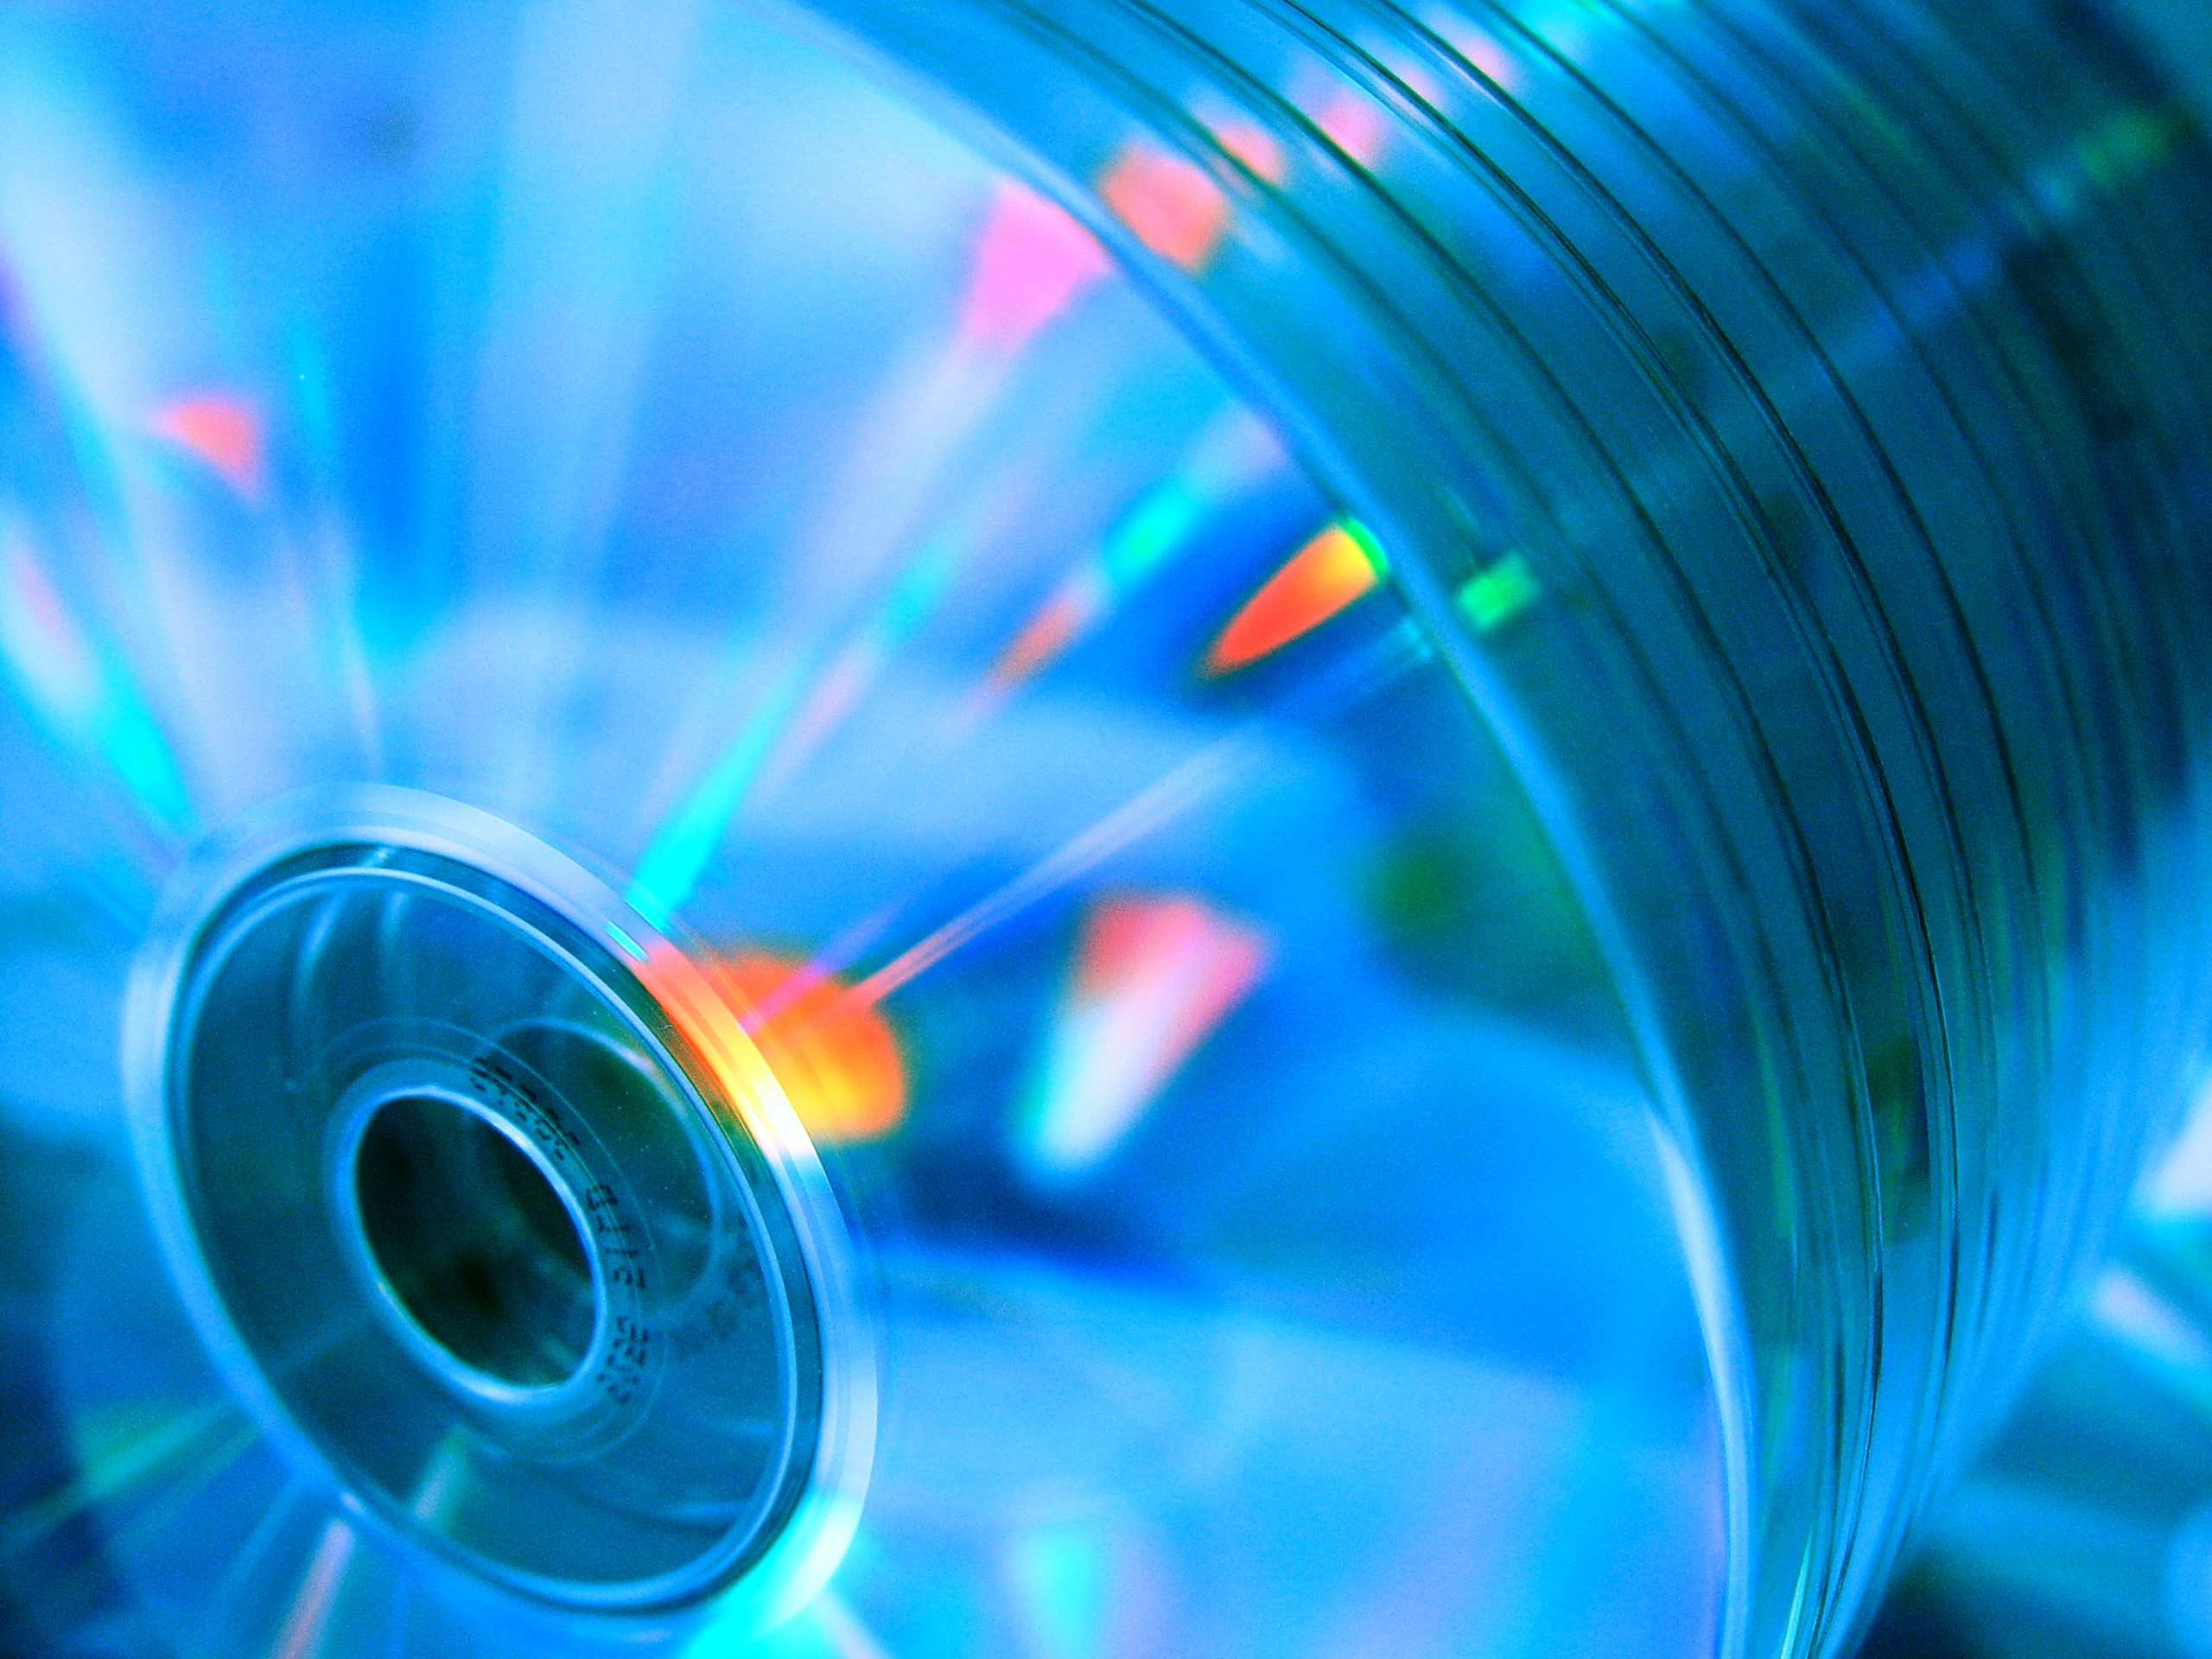 How to recover files from a CD-ROM or DVD that seems unreadable.